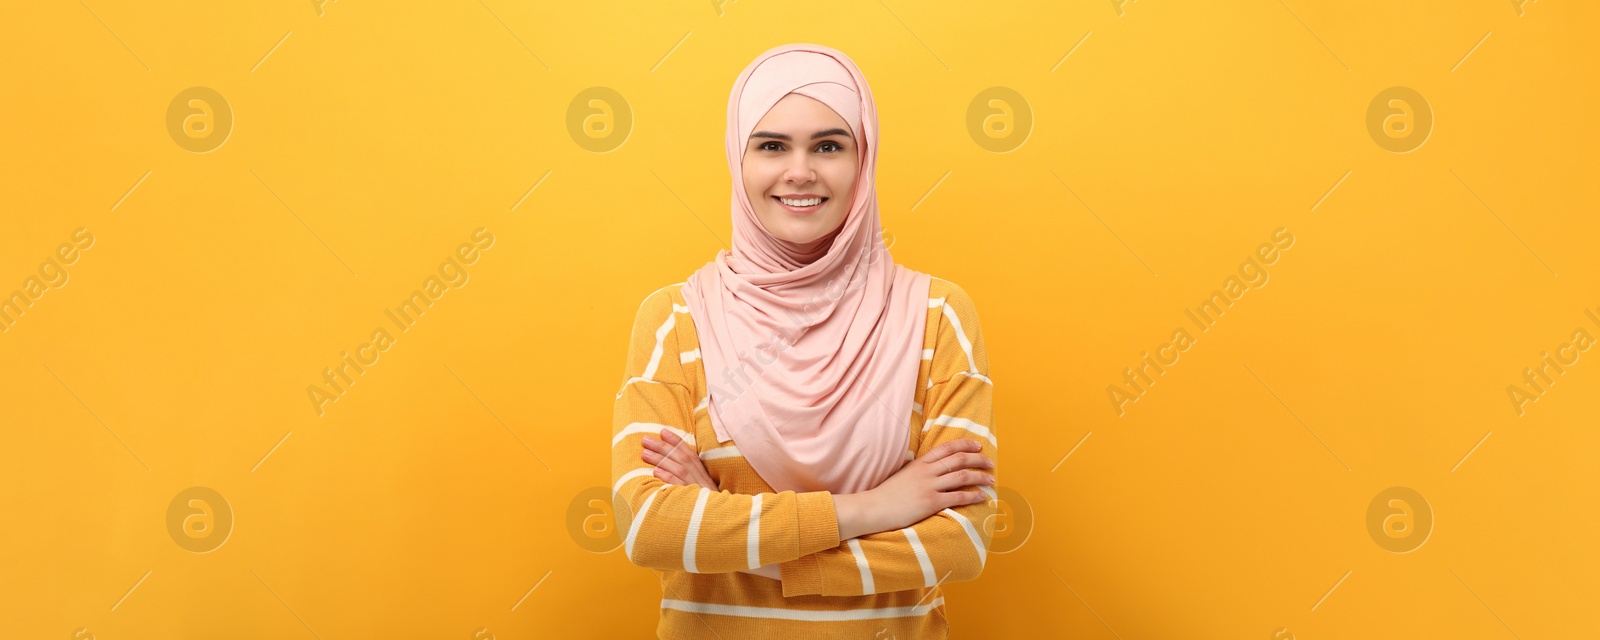 Image of Portrait of Muslim woman in hijab on yellow background. Banner design